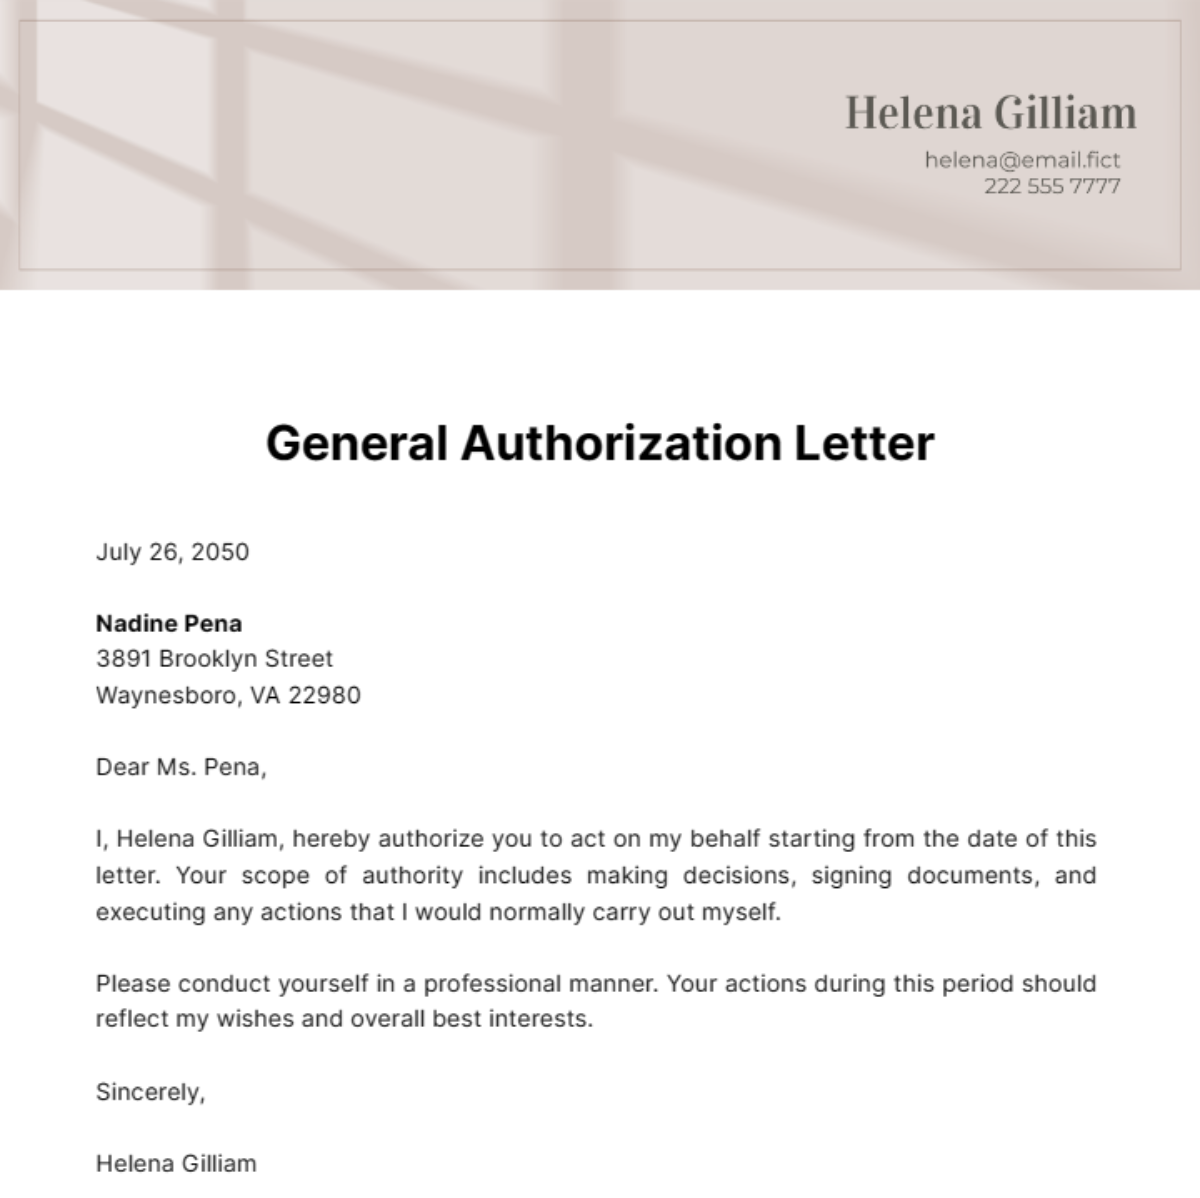 General Authorization Letter Template